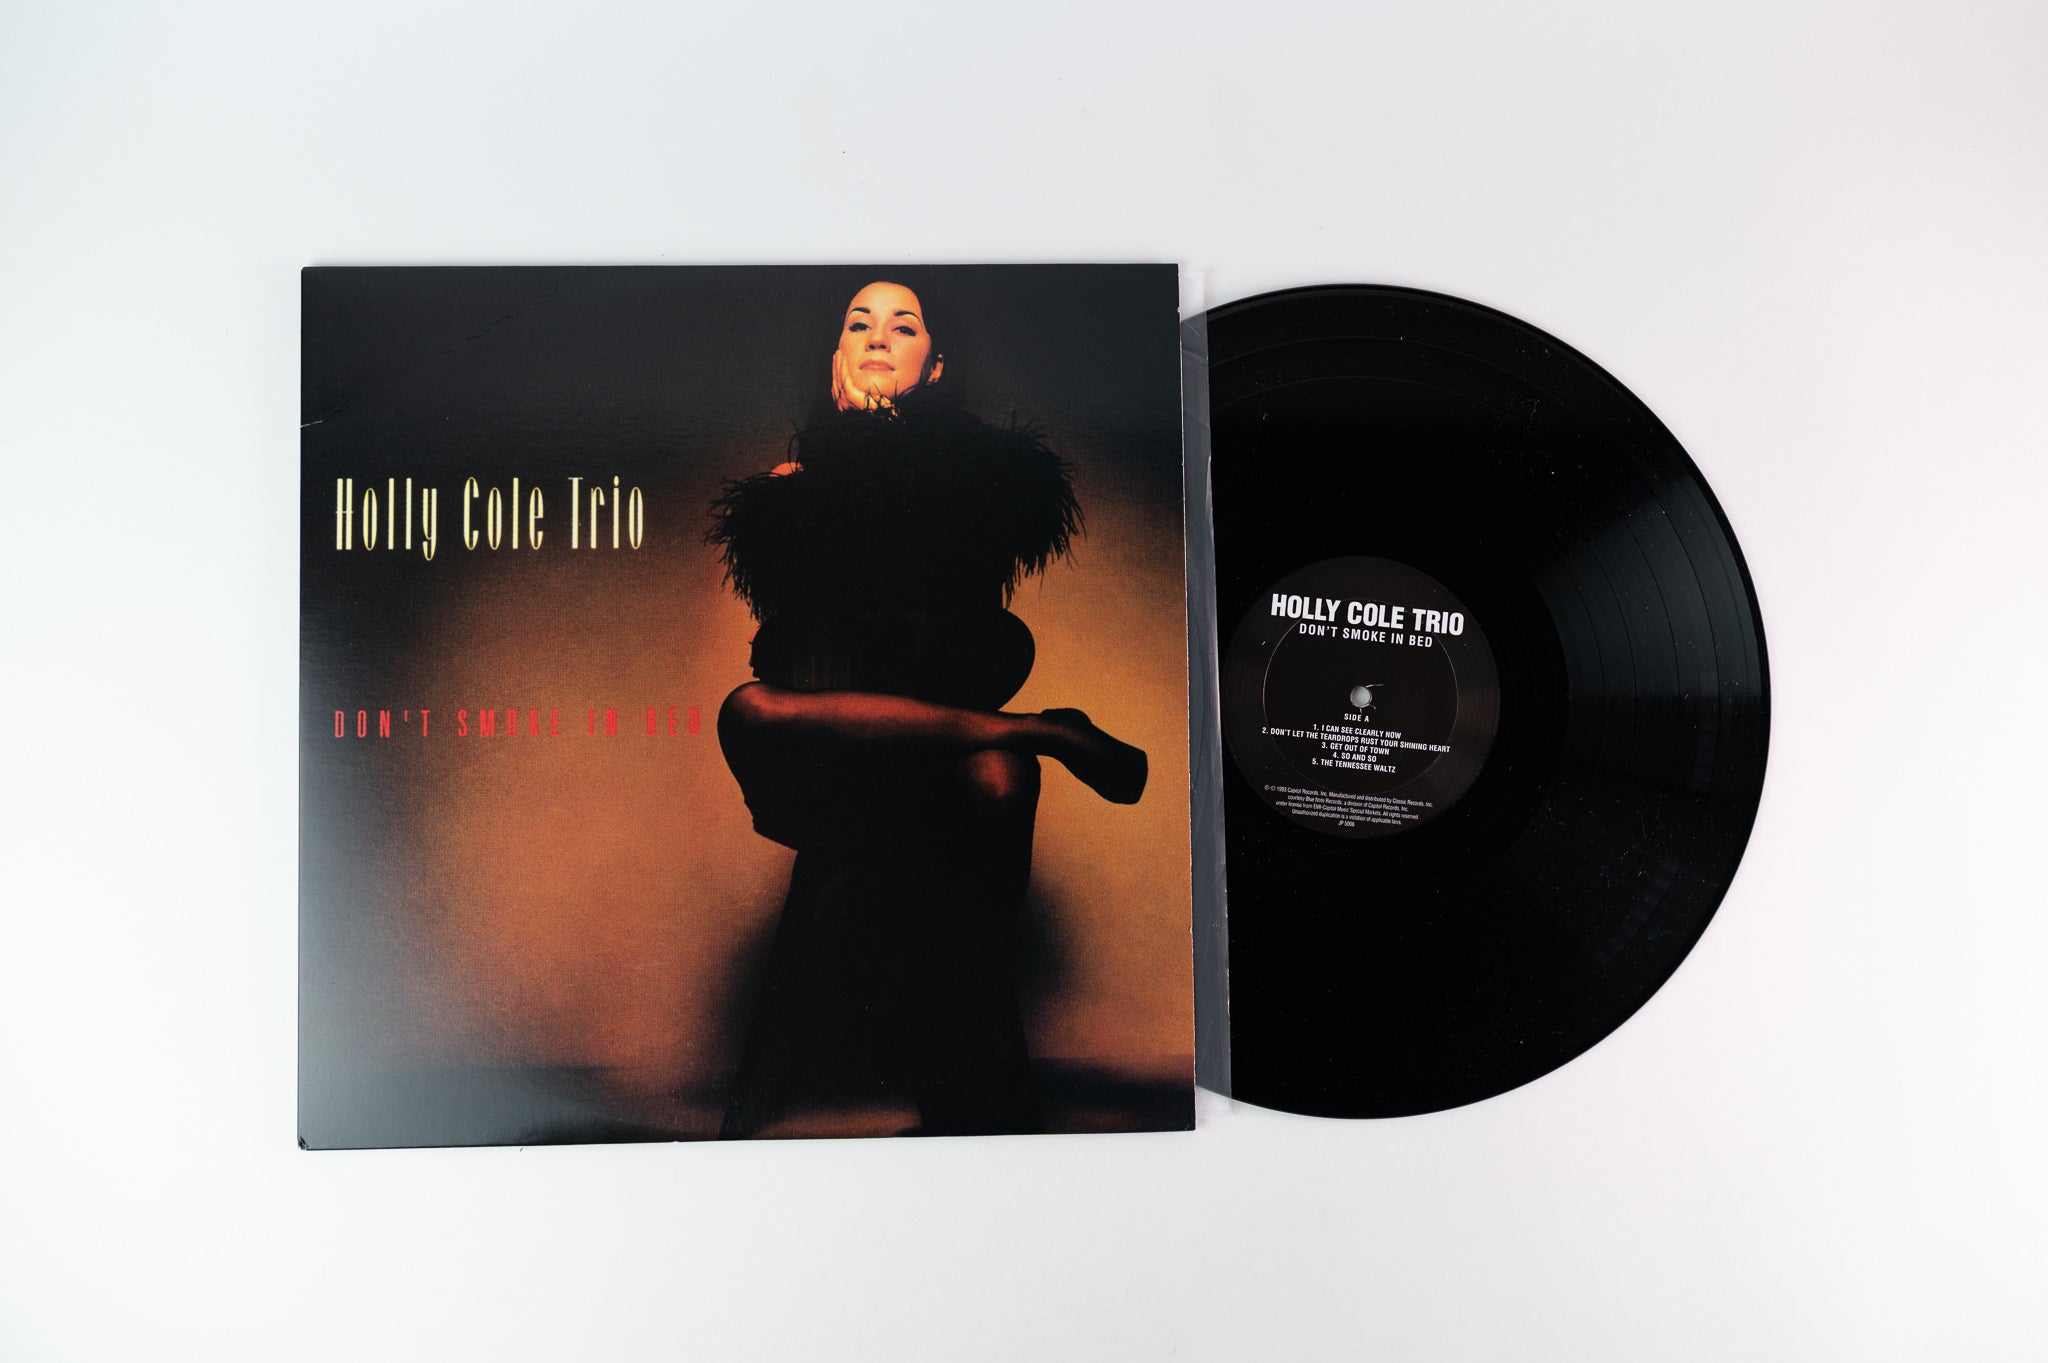 Holly Cole Trio - Don't Smoke In Bed on Classic Records 200 Gram Reissue